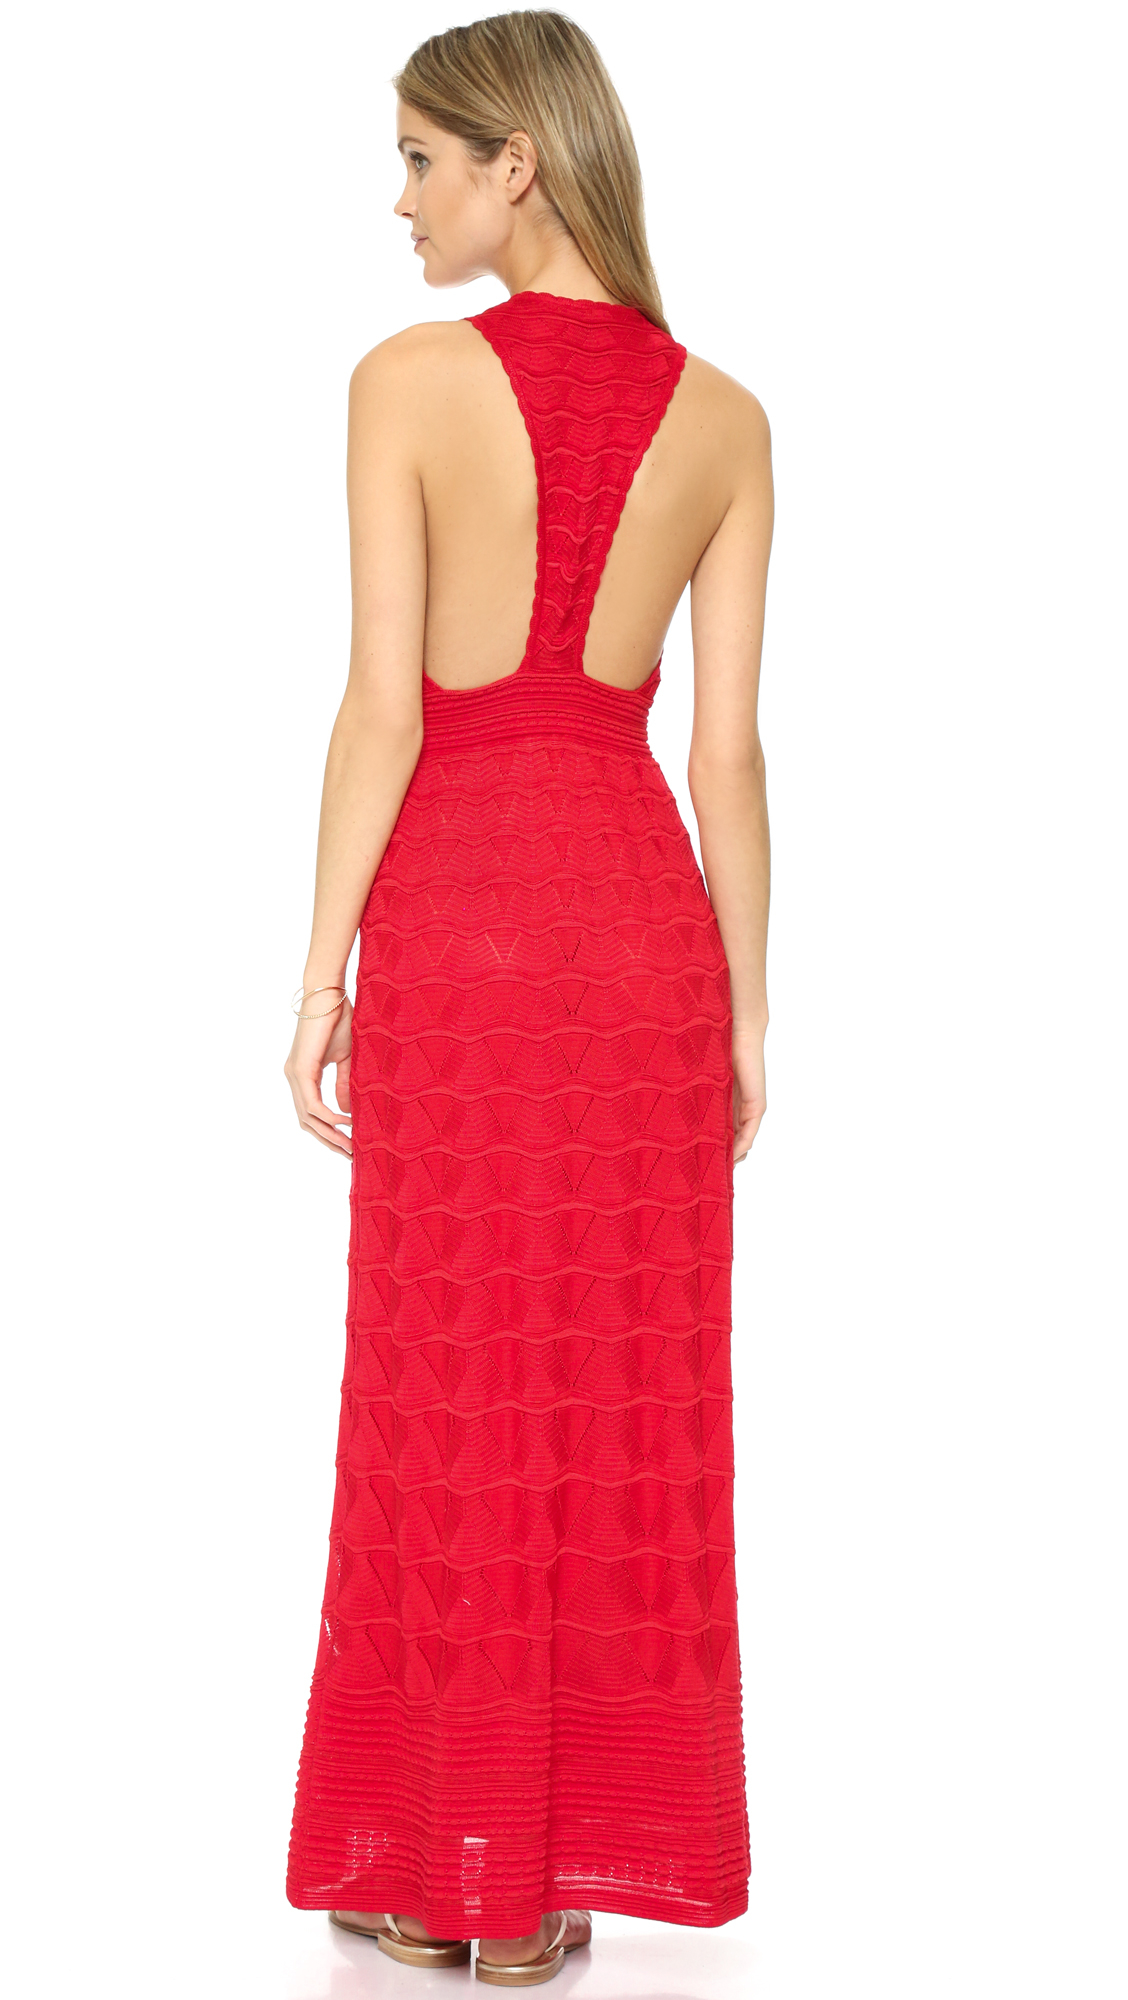 M Missoni Knit Racer Back Maxi Dress in Red - Lyst